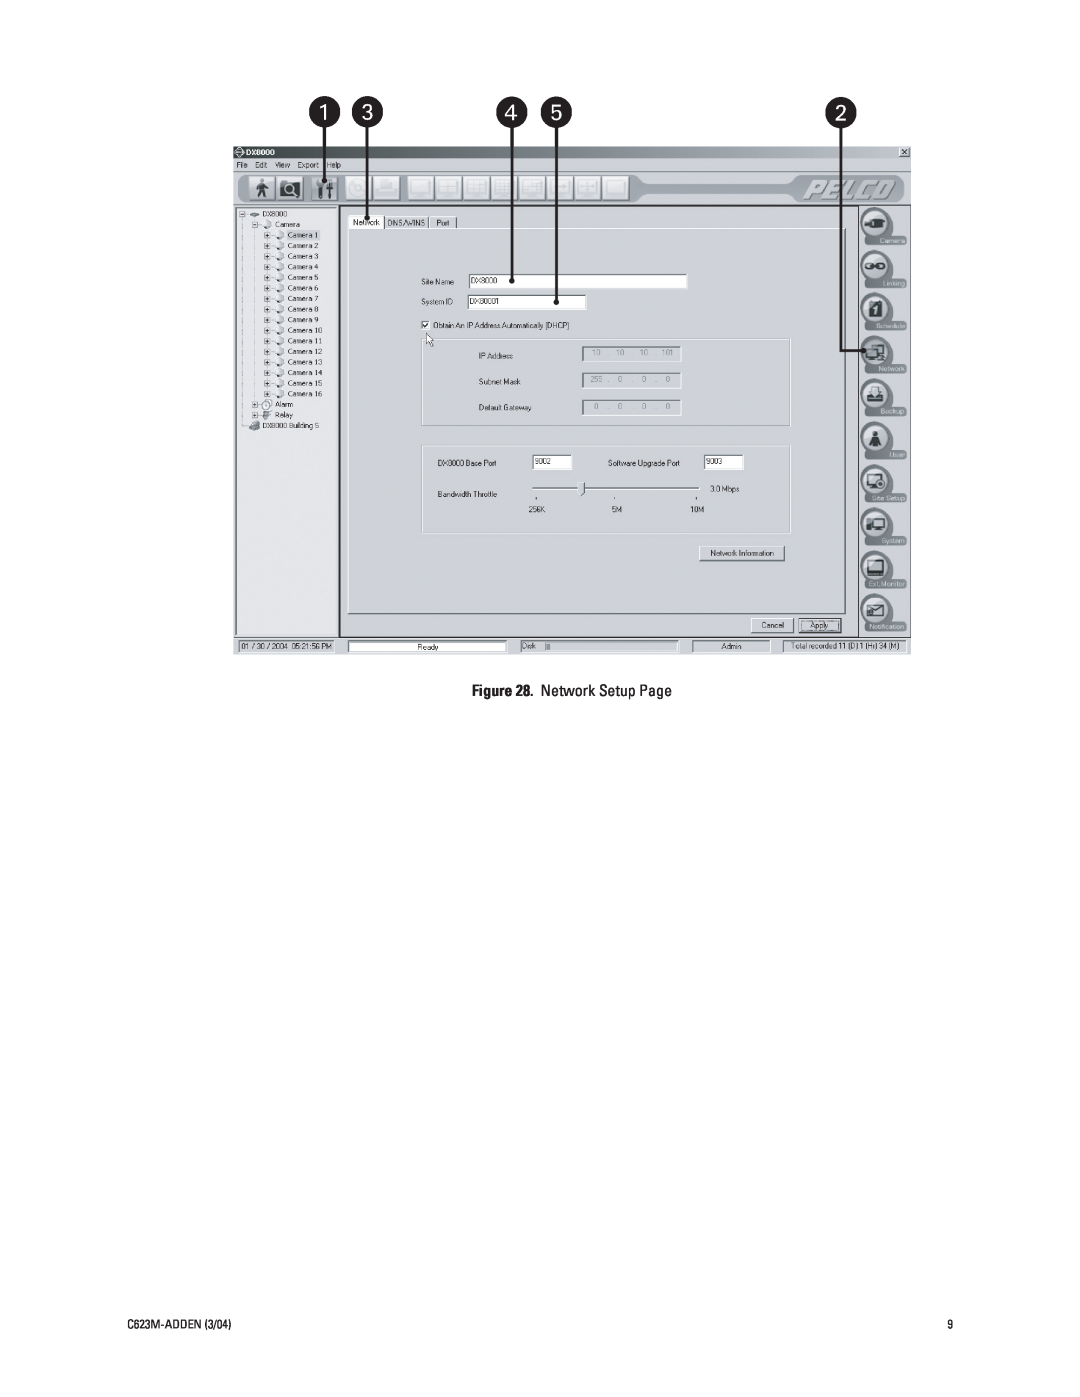 Pelco Dx8000 installation manual Network Setup Page, C623M-ADDEN3/04 